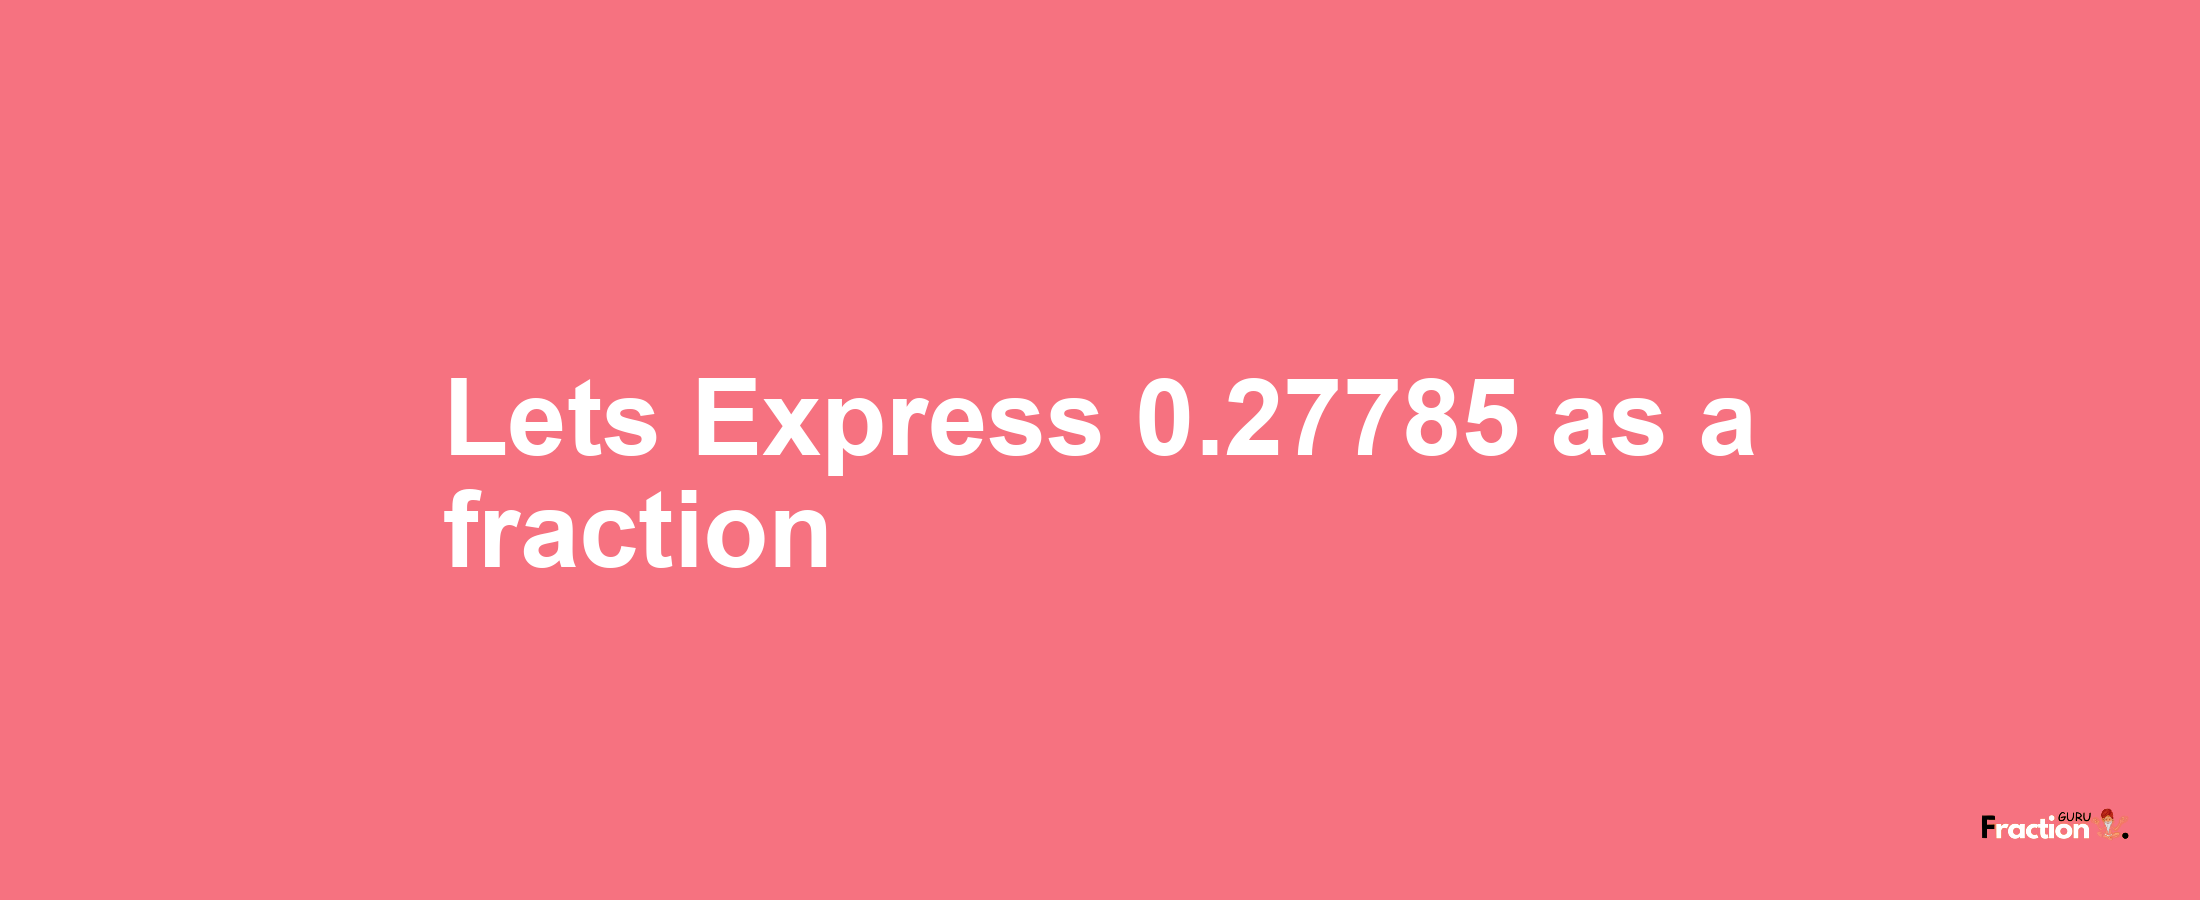 Lets Express 0.27785 as afraction